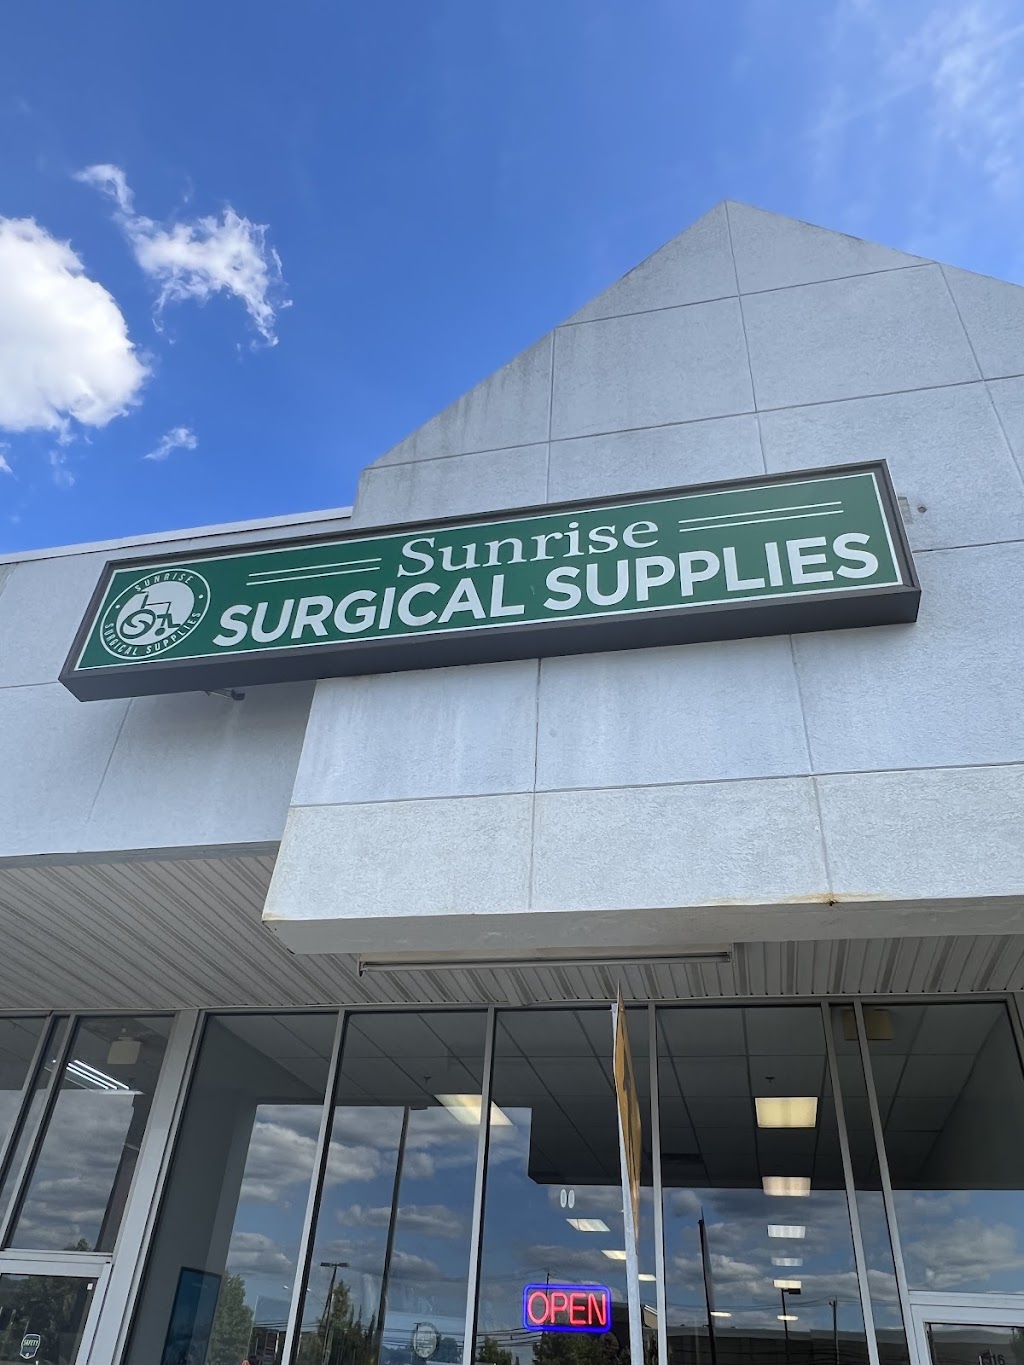 Sunrise Surgical & Medical Supplies | 516 New Friendship Rd, Howell Township, NJ 07731 | Phone: (732) 901-9500